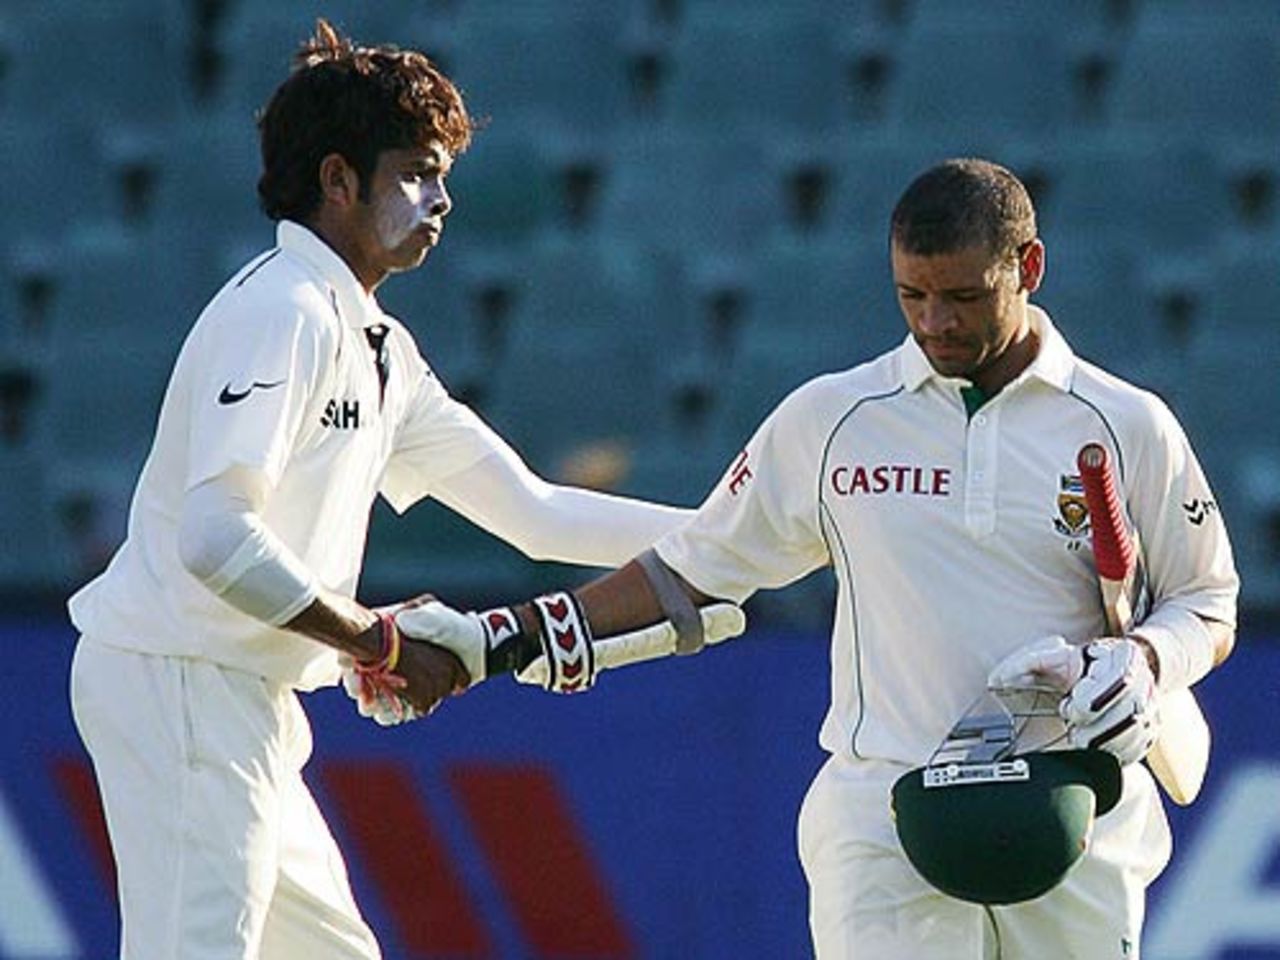 Ashwell Prince lives to fight another day and Sreesanth gives him due credit, South Africa v India, 1st Test, Johannesburg, 3rd day, December 17, 2006